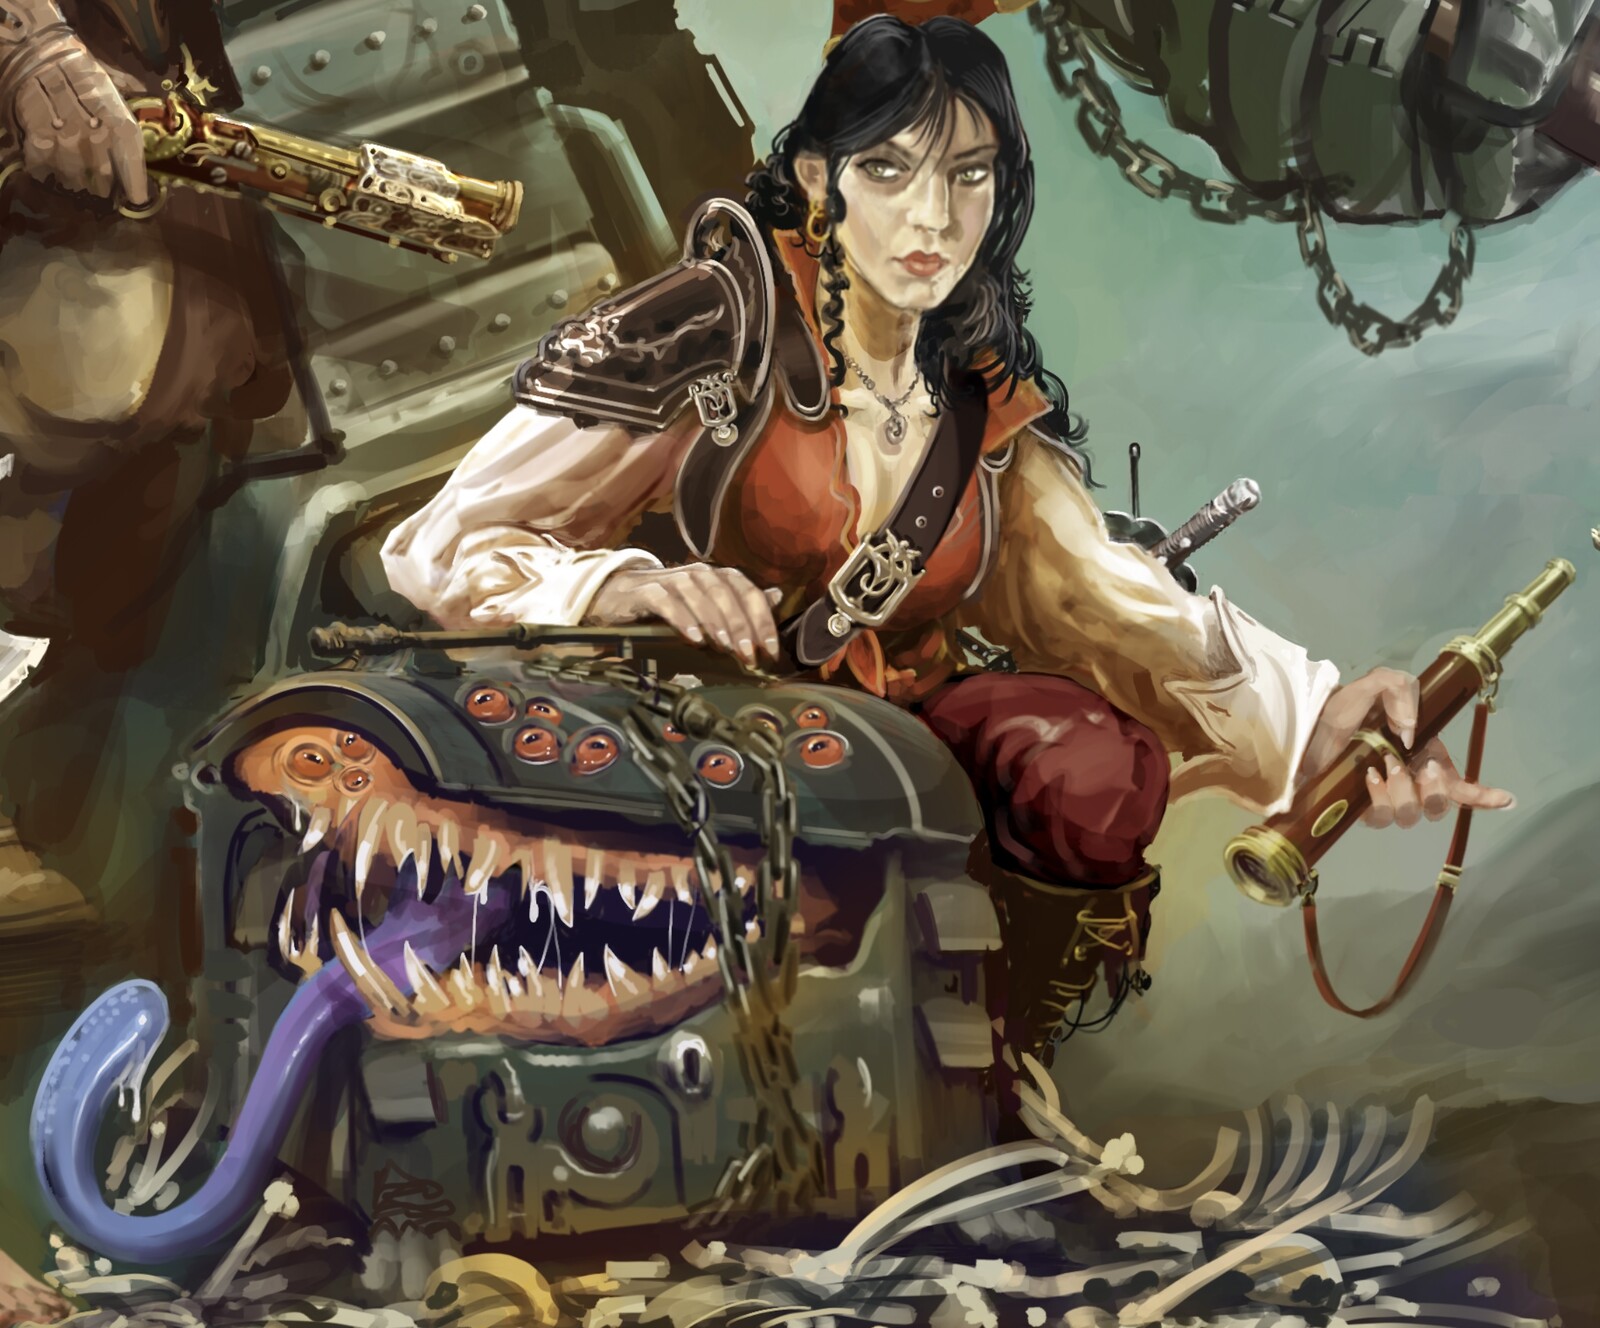 …and the ship’s captain and their pet mimic (useful).